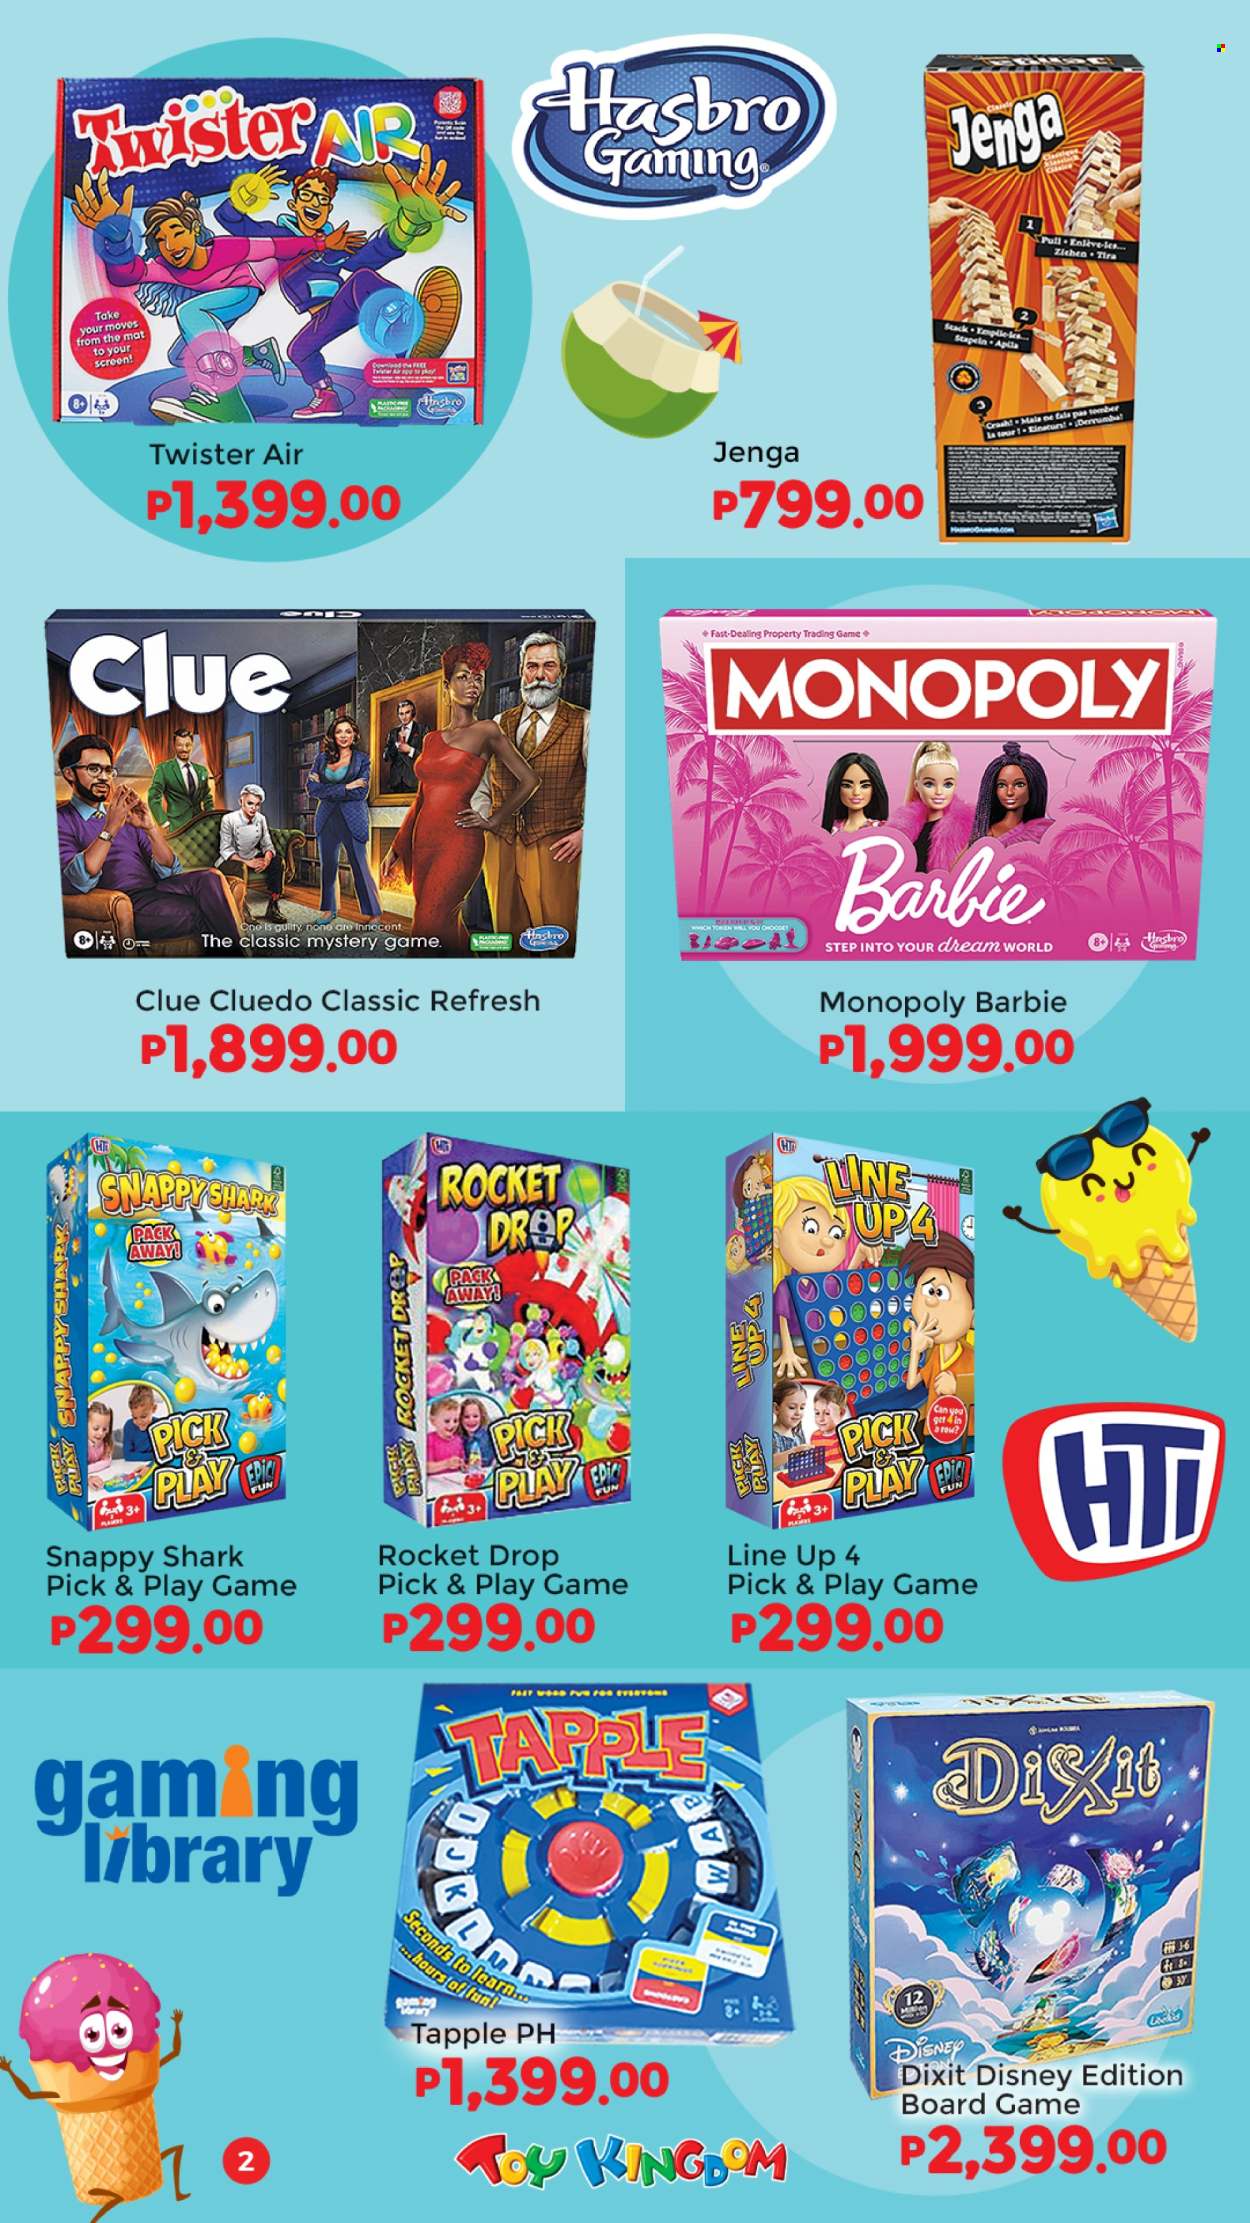 thumbnail - Toy Kingdom offer  - Sales products - Disney, Barbie, Monopoly, rocket, toys, Twister, board game. Page 2.